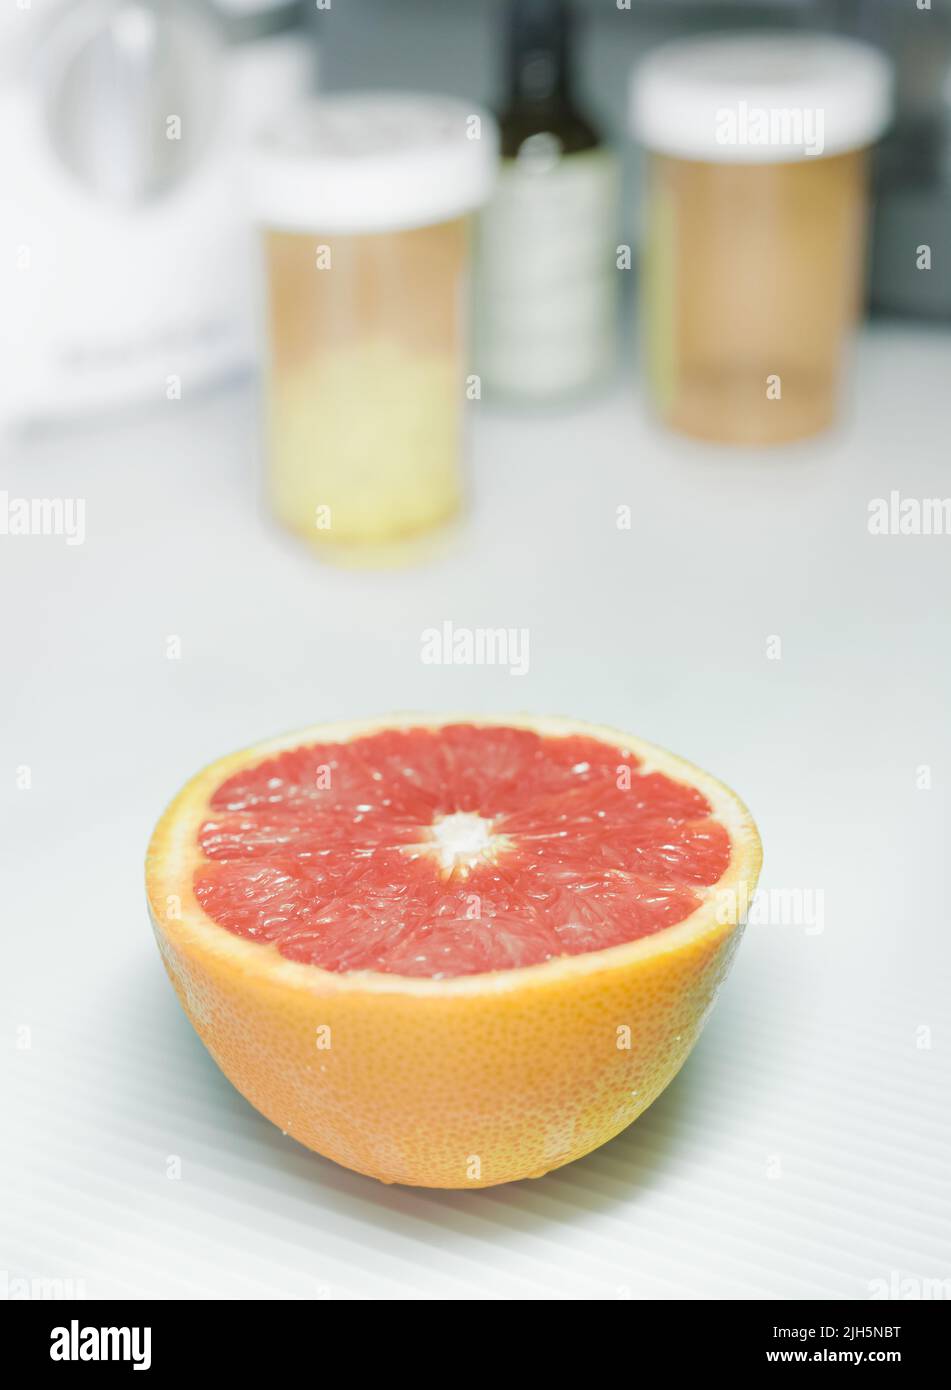 Half grapefruit in front, blurred background with some pills containers. Stock Photo